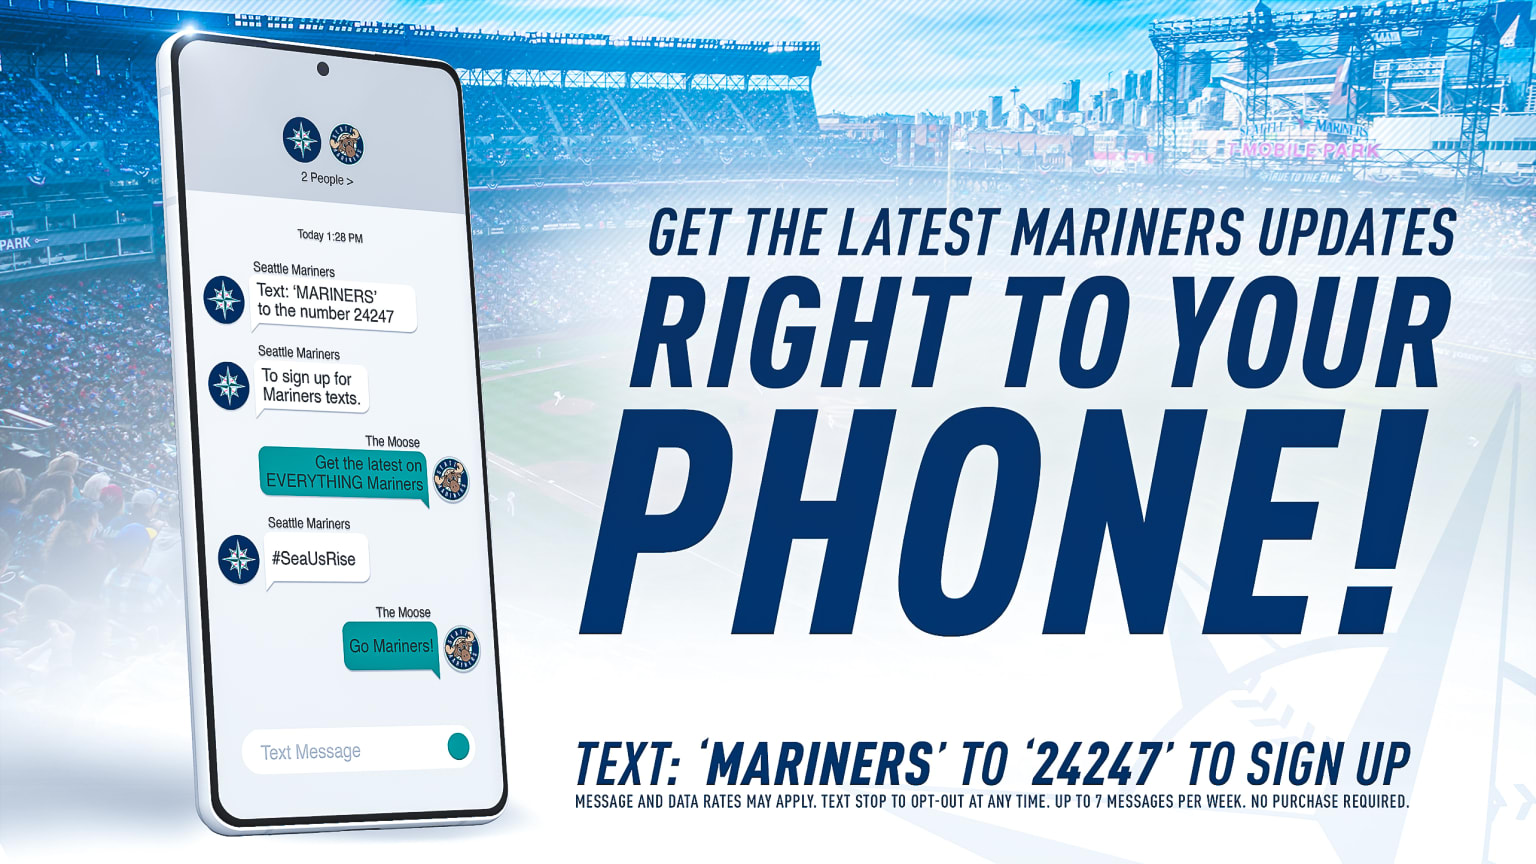 go mariners images